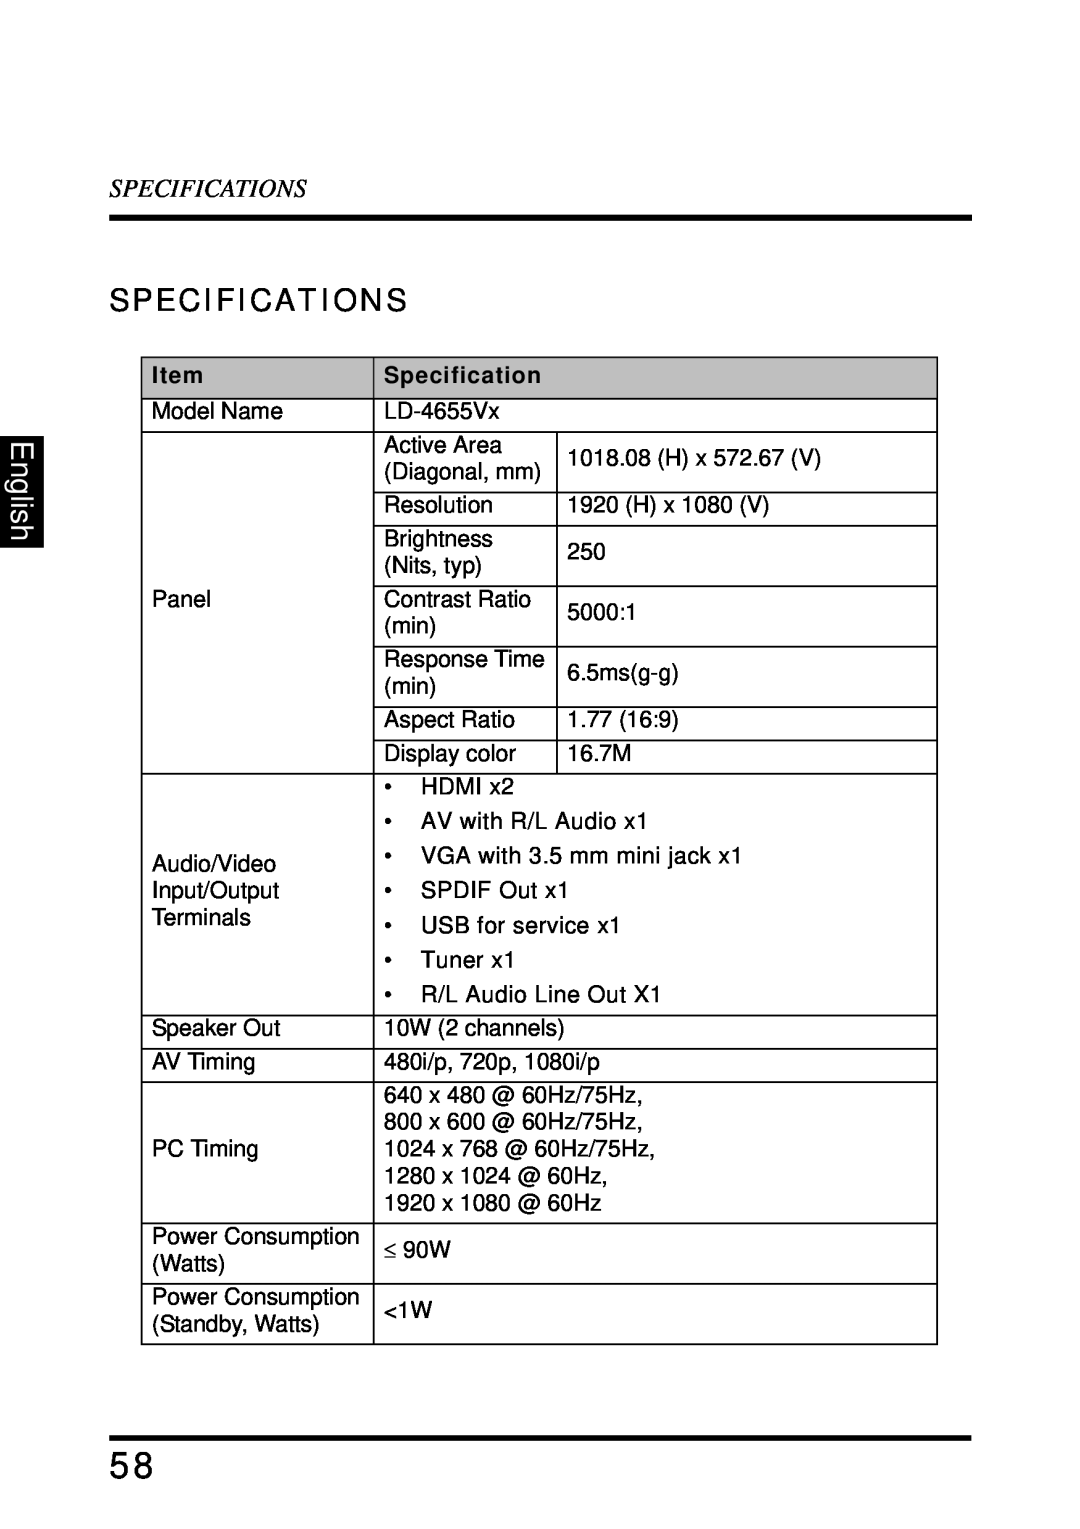 Westinghouse LD-4680 user manual Specifications, English 